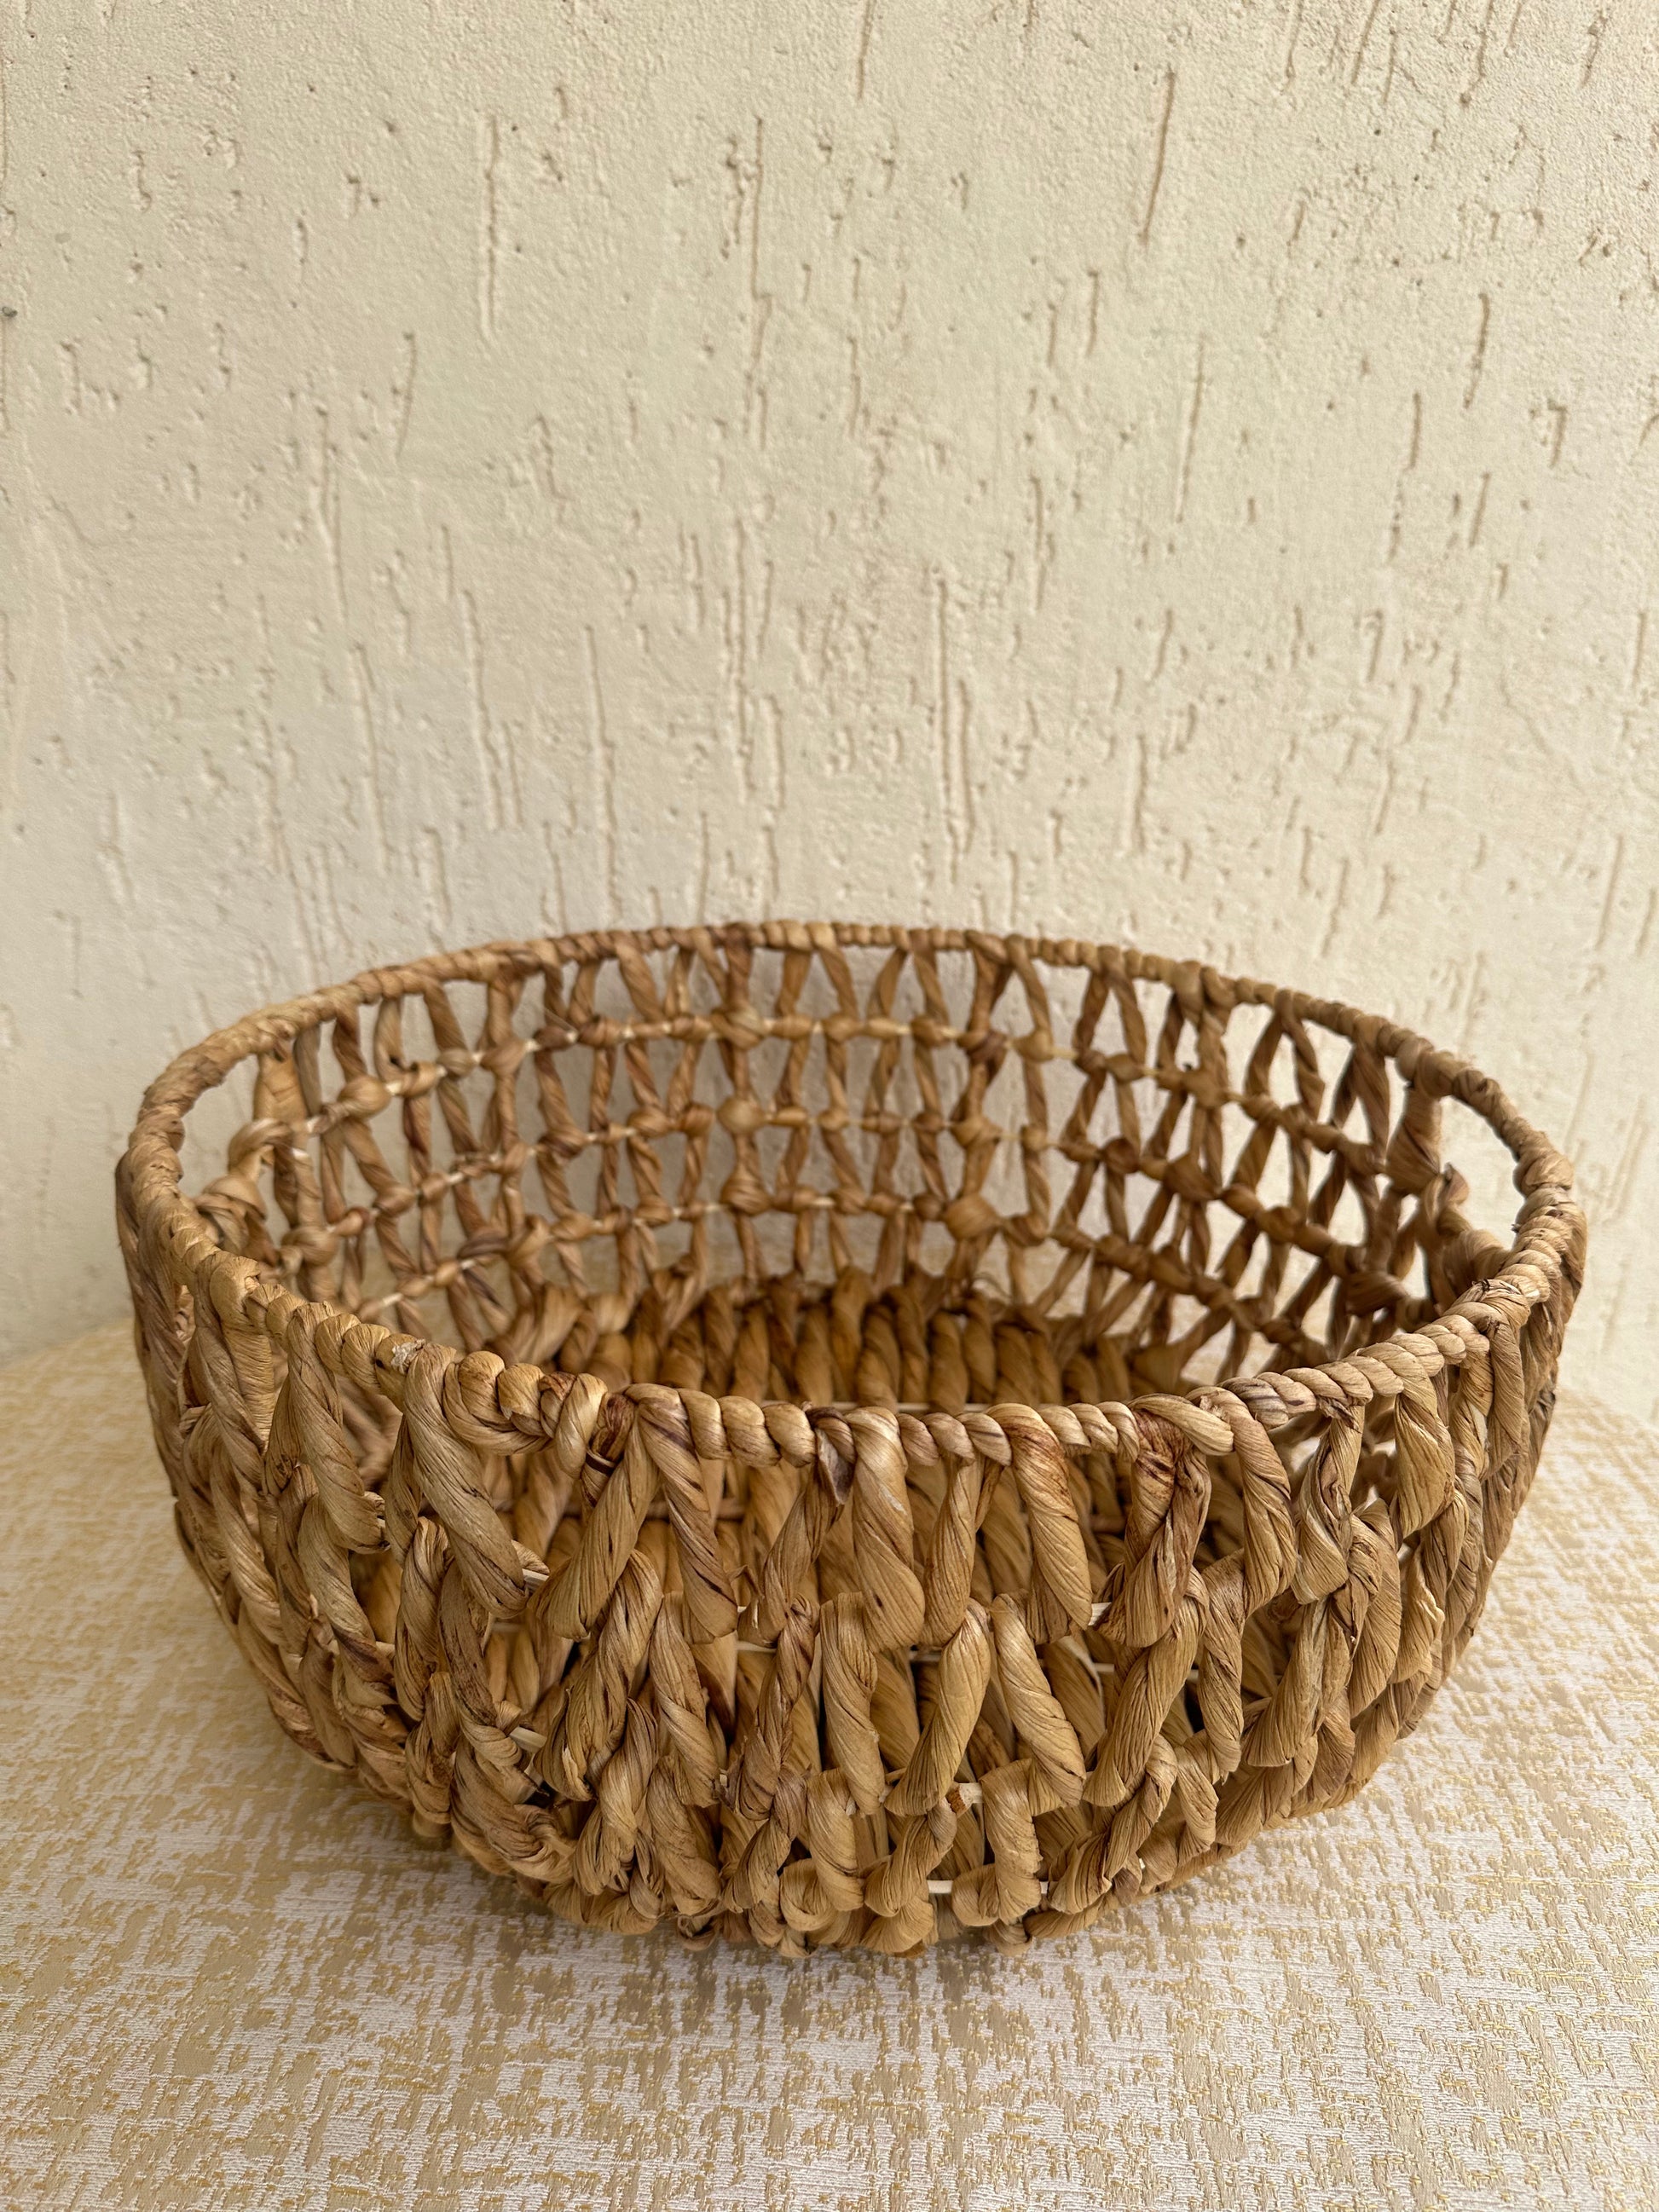  Aesthetics, Cut-Work baskets, Decorative home accents, Durability, Eco-conscious home décor, Functionality, Natural texture, Stylish storage options, Stylish storage solutions, Sustainability, Water Hyacinth Baskets, Water Hyacinth Cut-Work Basket, TESU